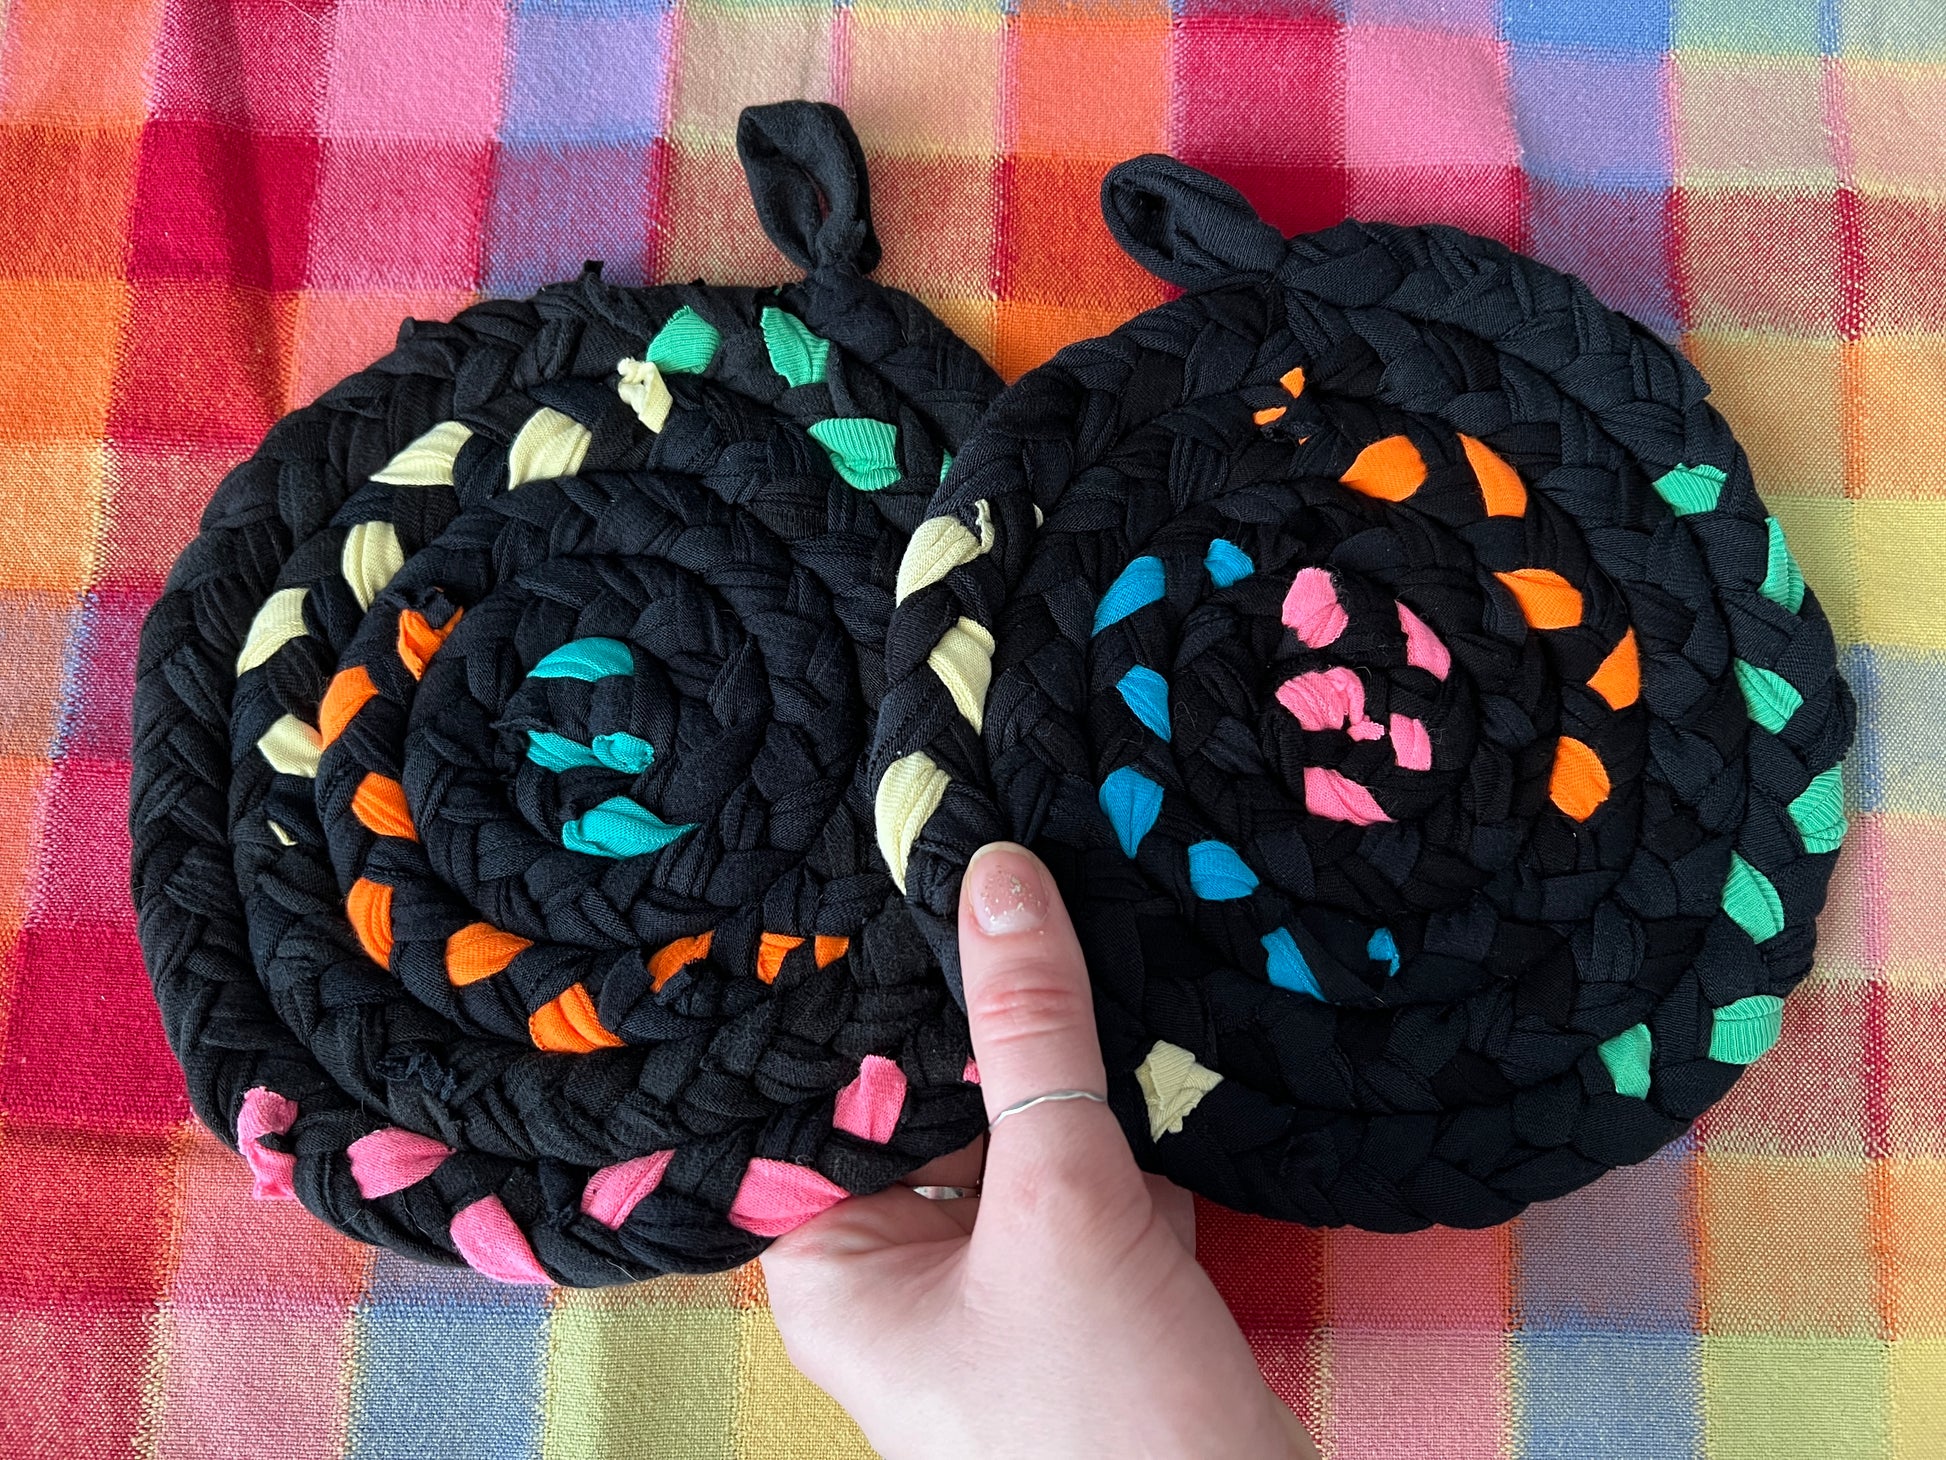 black neons potholder set, in hand for scale, against a colorful background